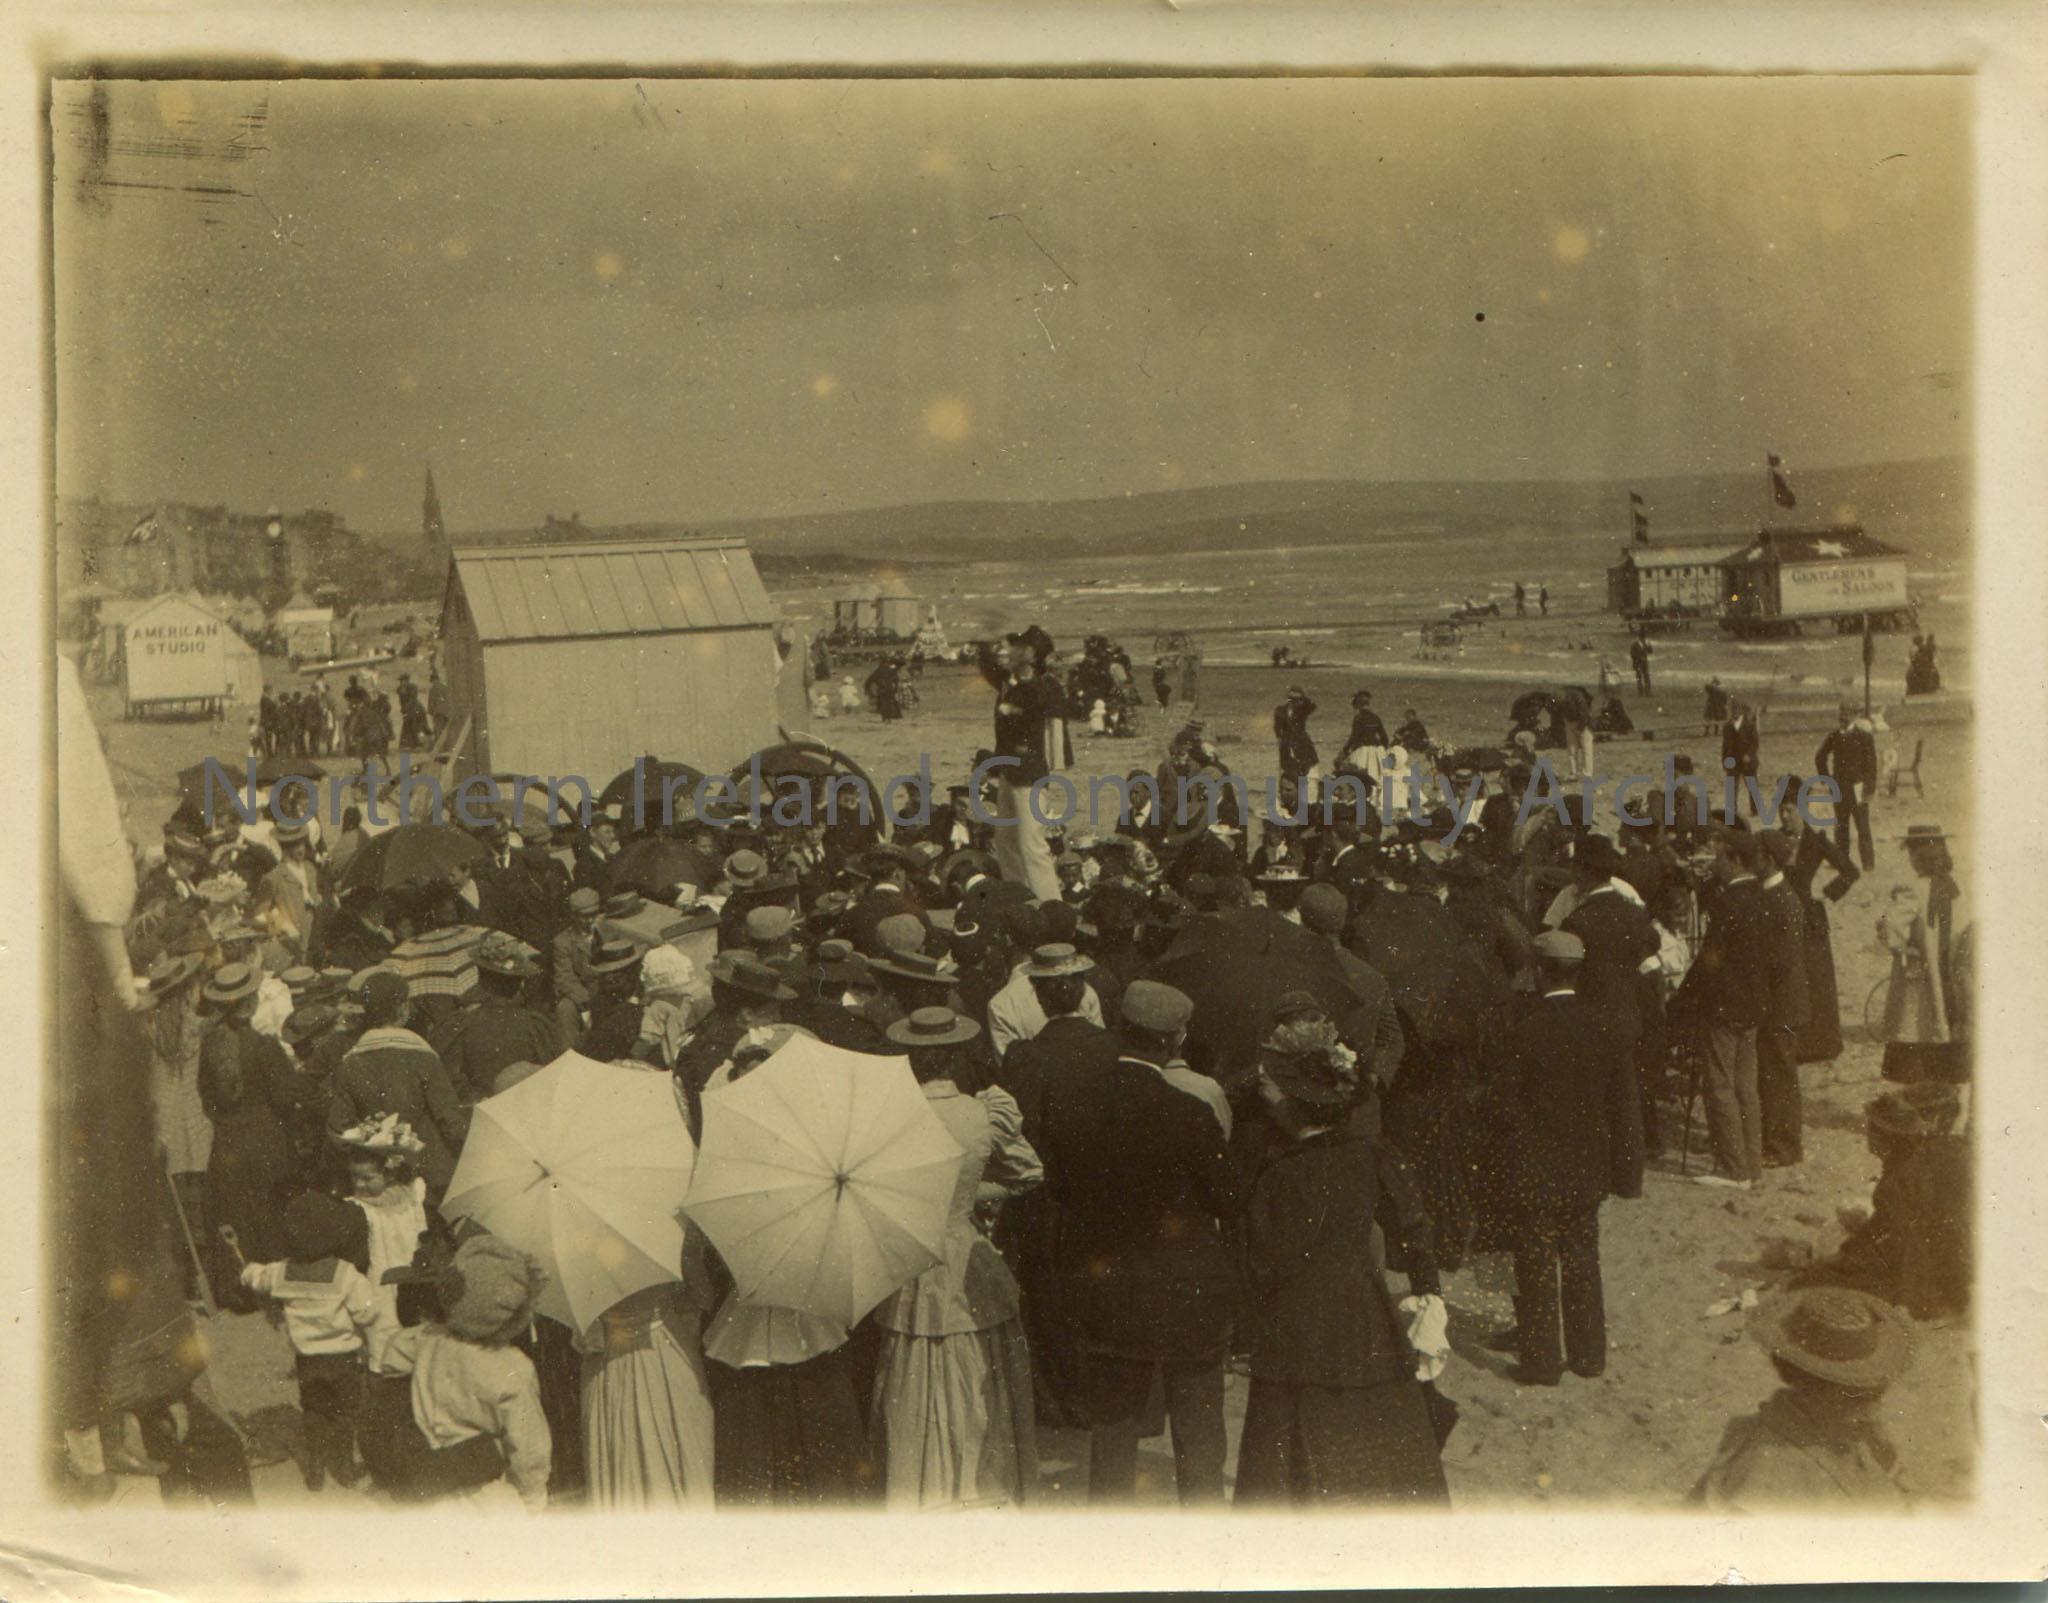 Black and white landscape photograph of a crowd at a beach watching a man perform. Gentleman’s Saloon hut in the sea in the background.